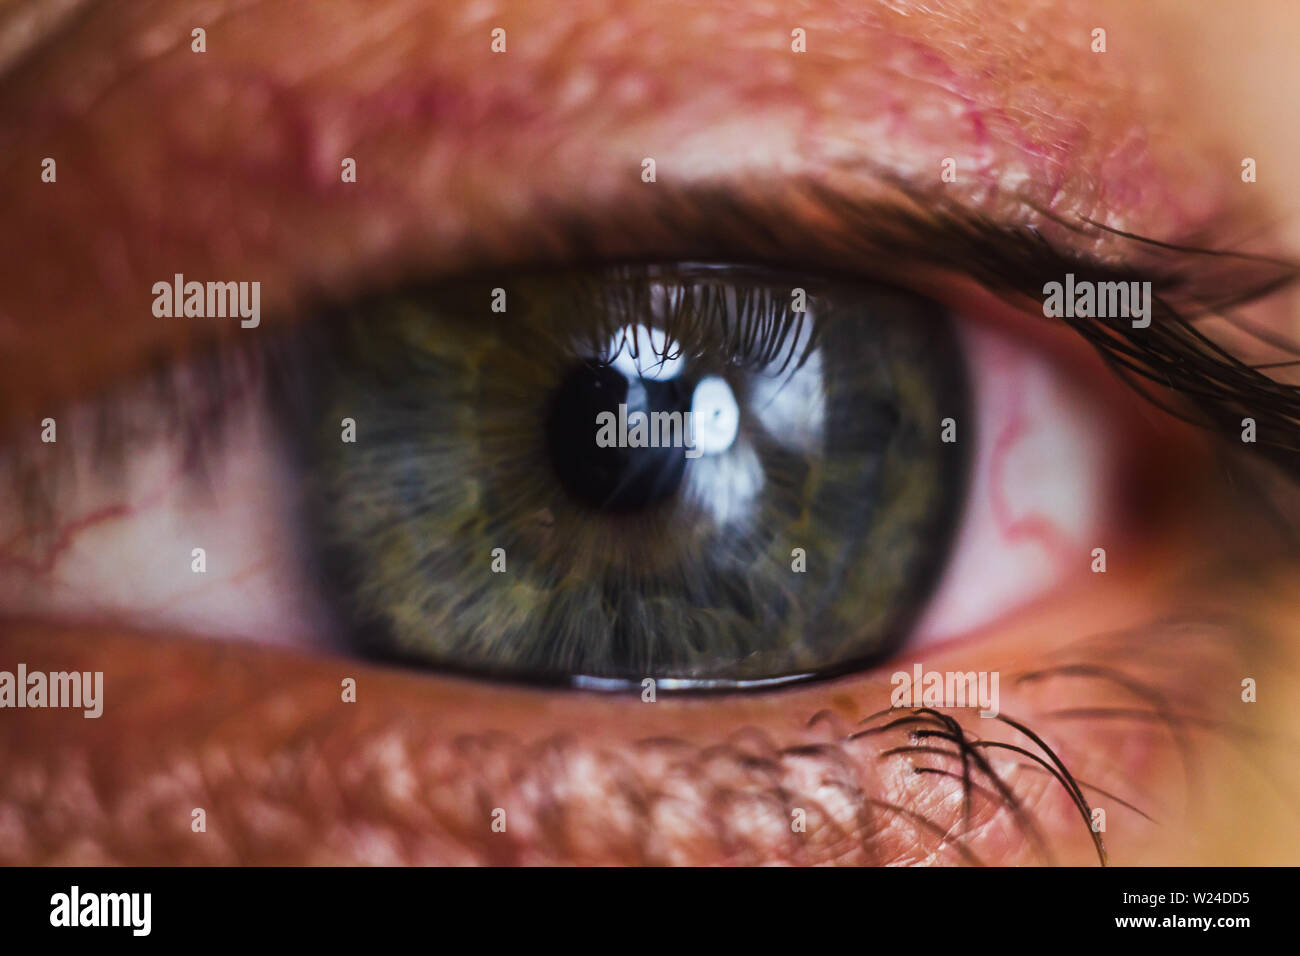 open human eye with bright red arteries close up. irritation and redness of the eyeball. pupils, iris, eyelashes in macro. vision problems. Stock Photo